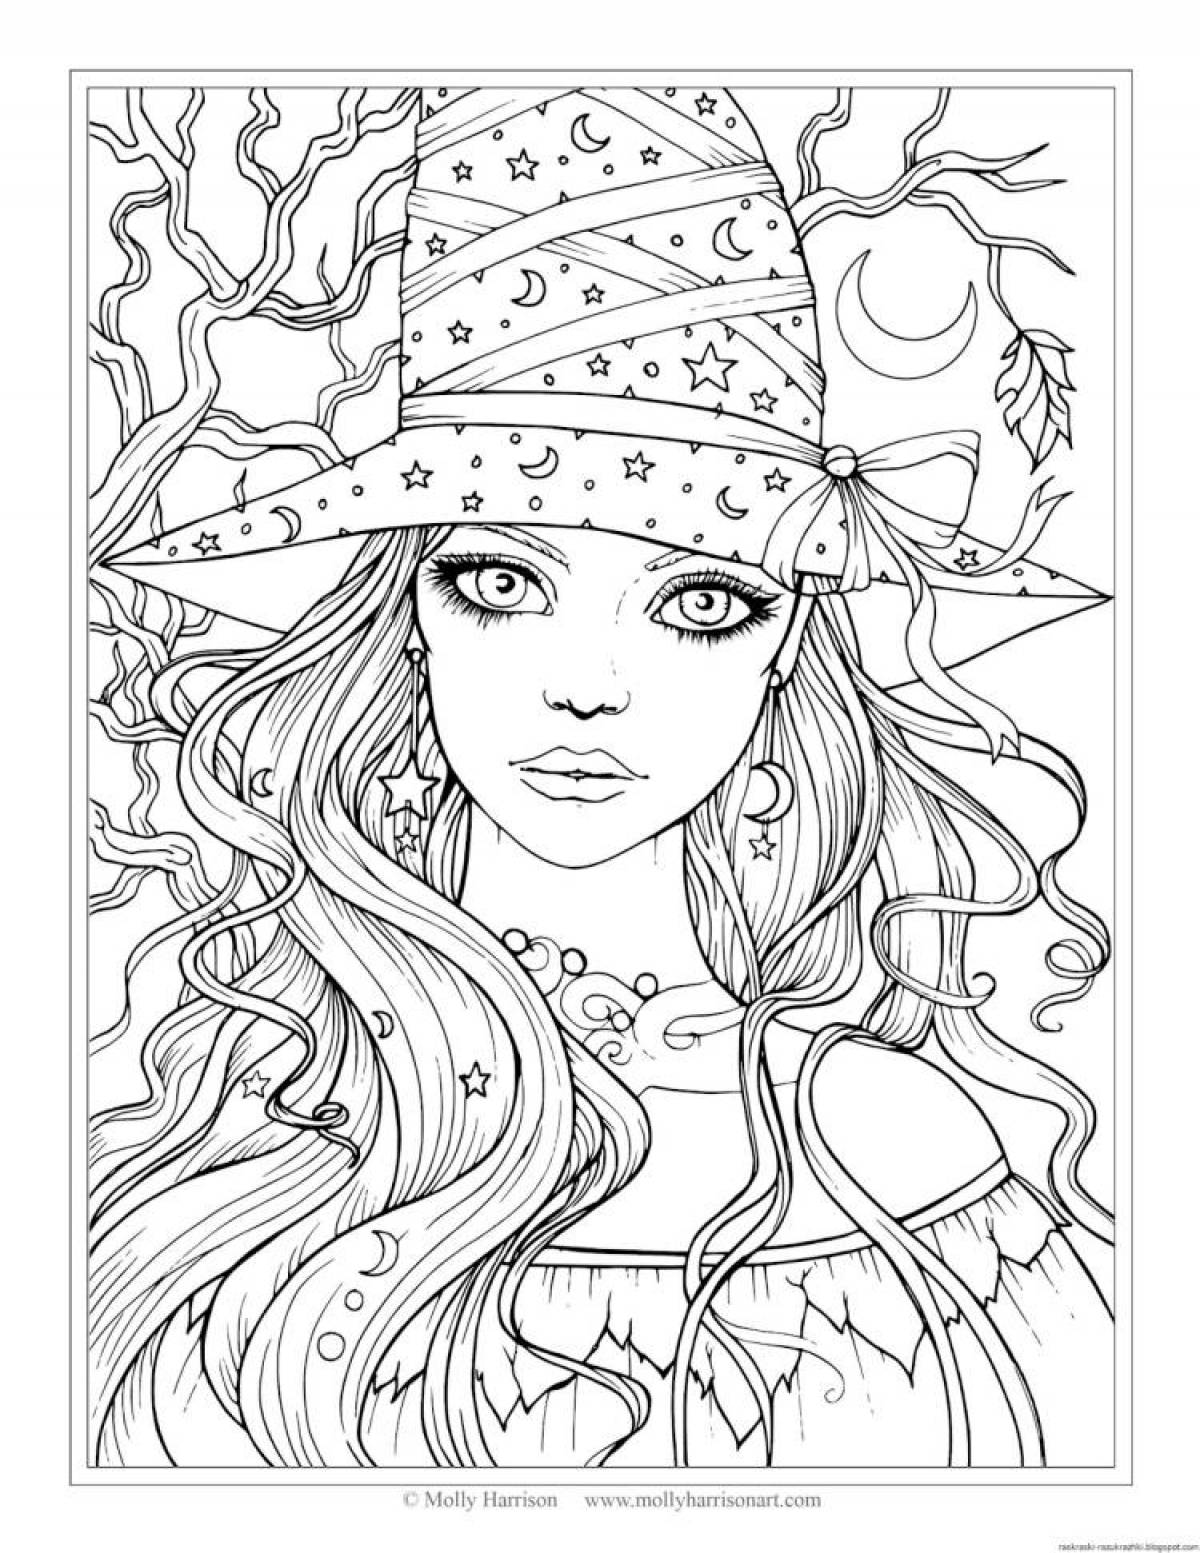 Exquisite coloring book for girls 12 years old